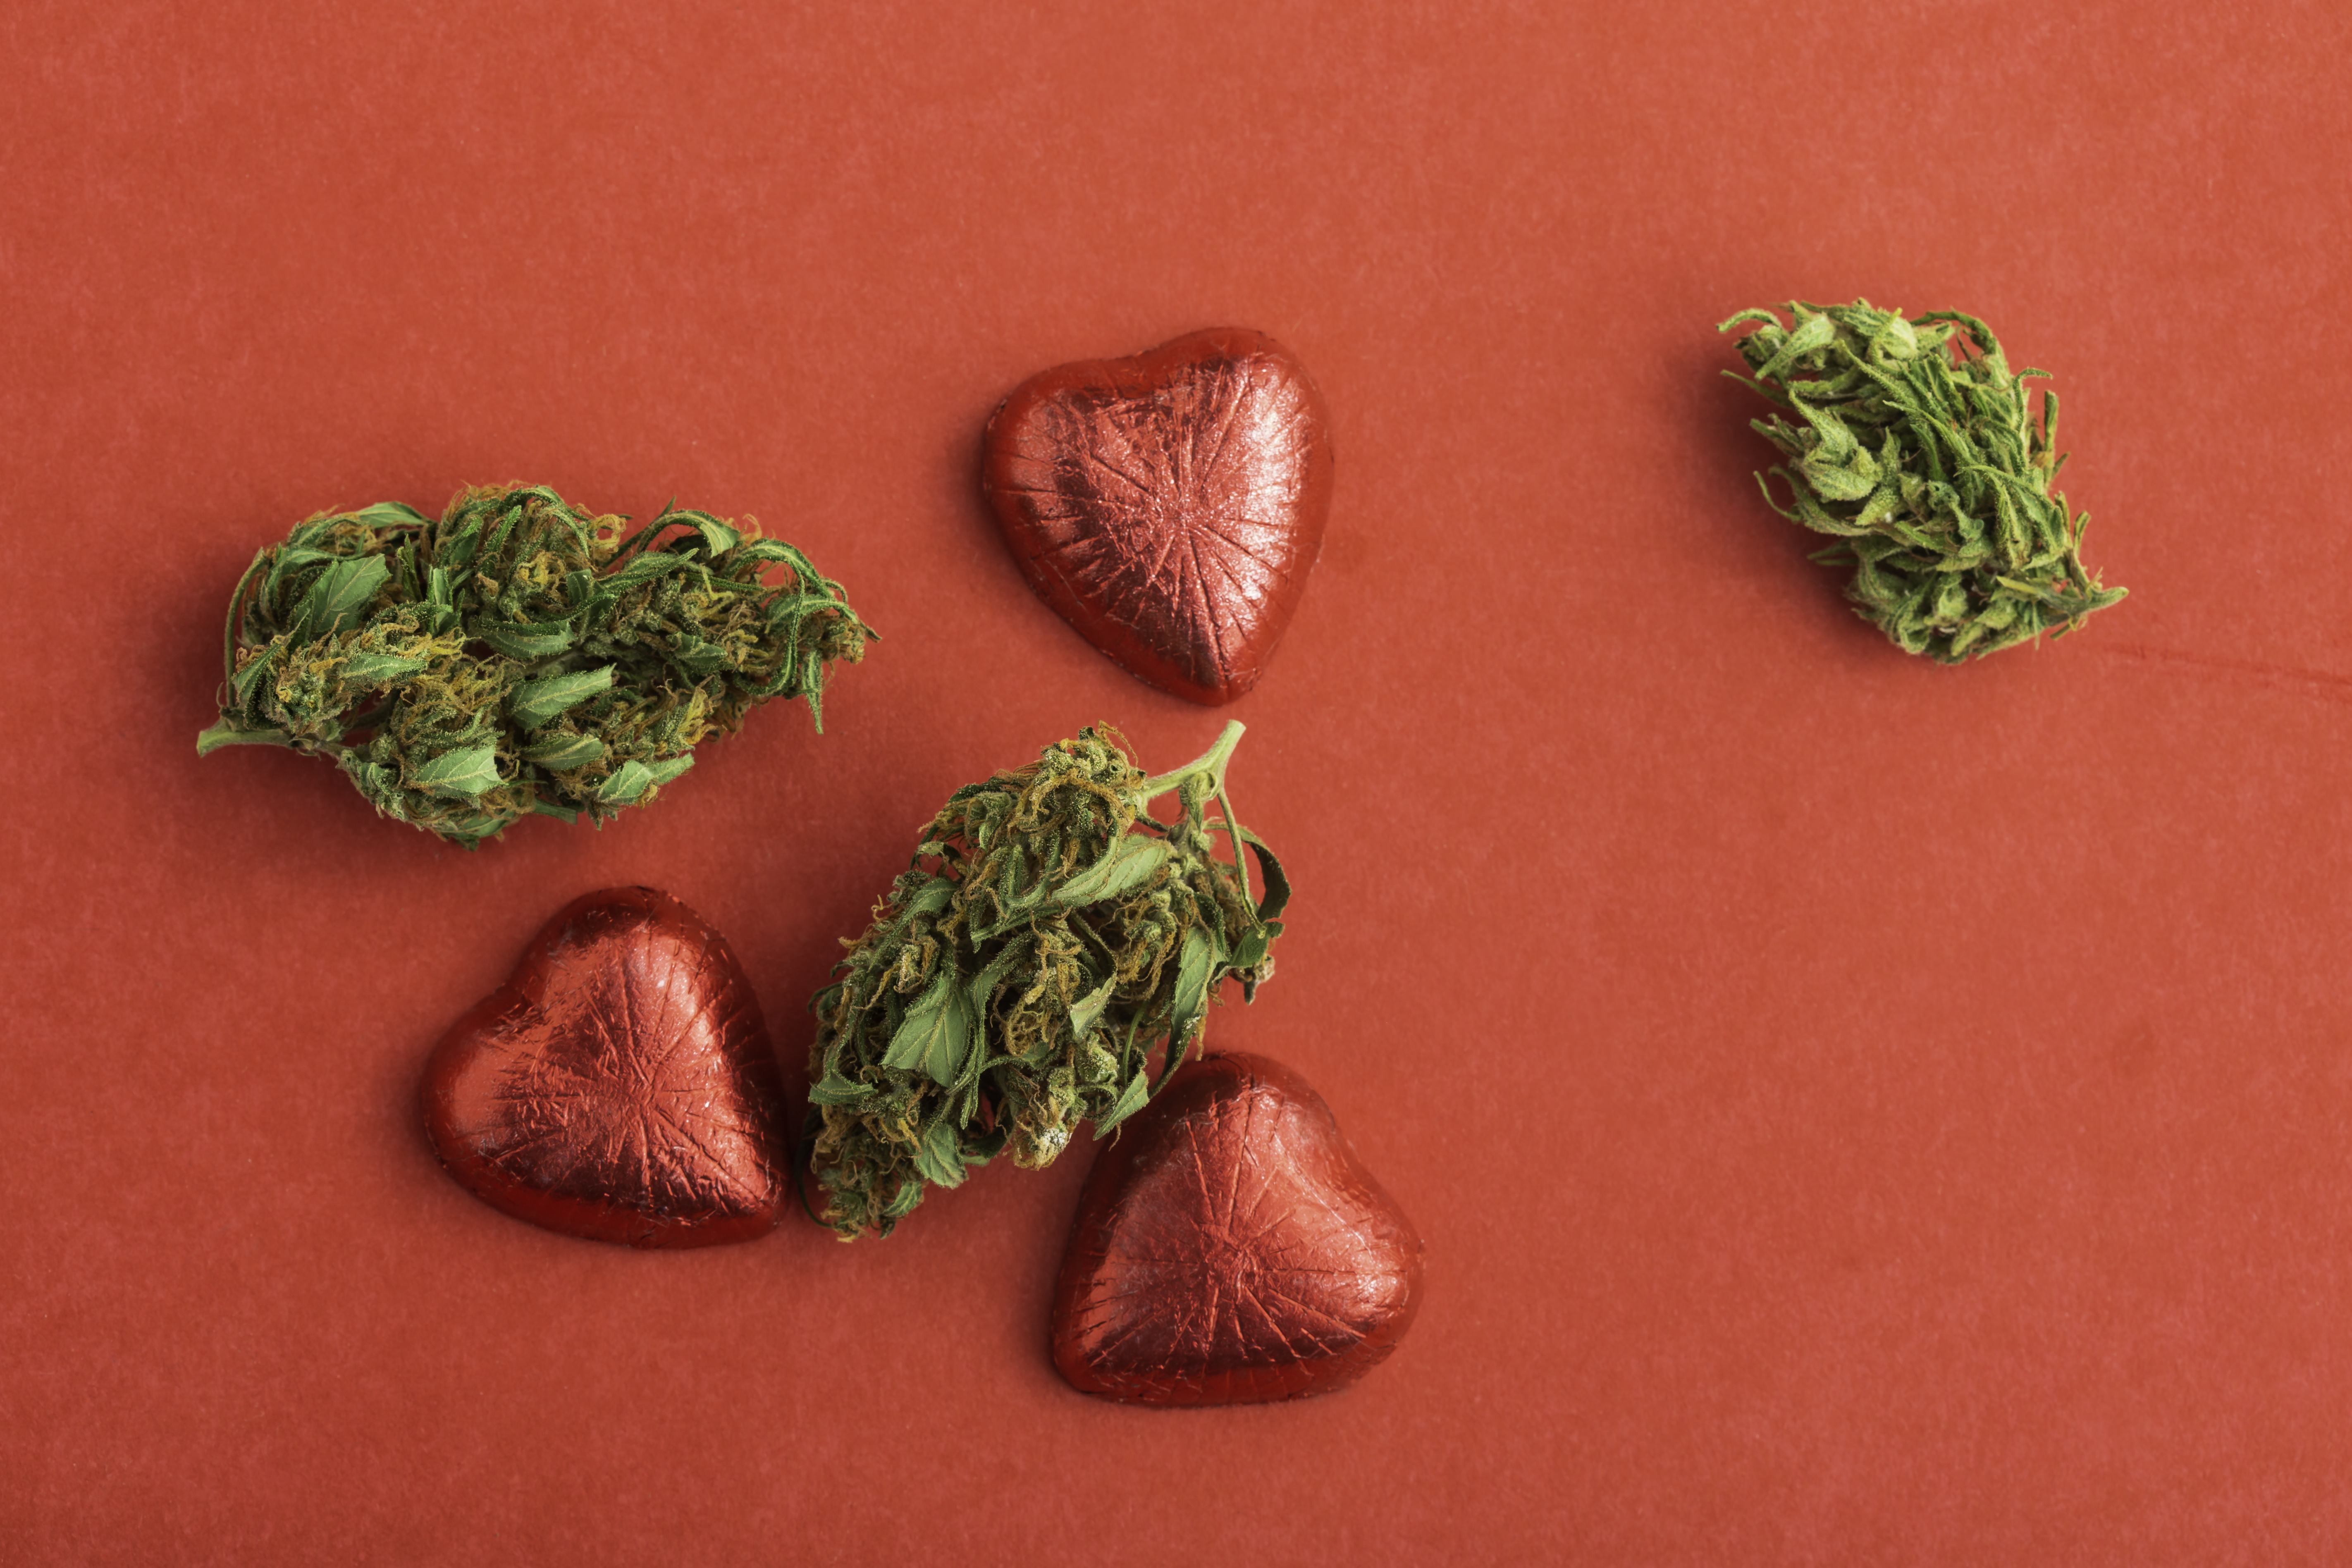 Five 420 Gifts to give your partner this Valentine's Day